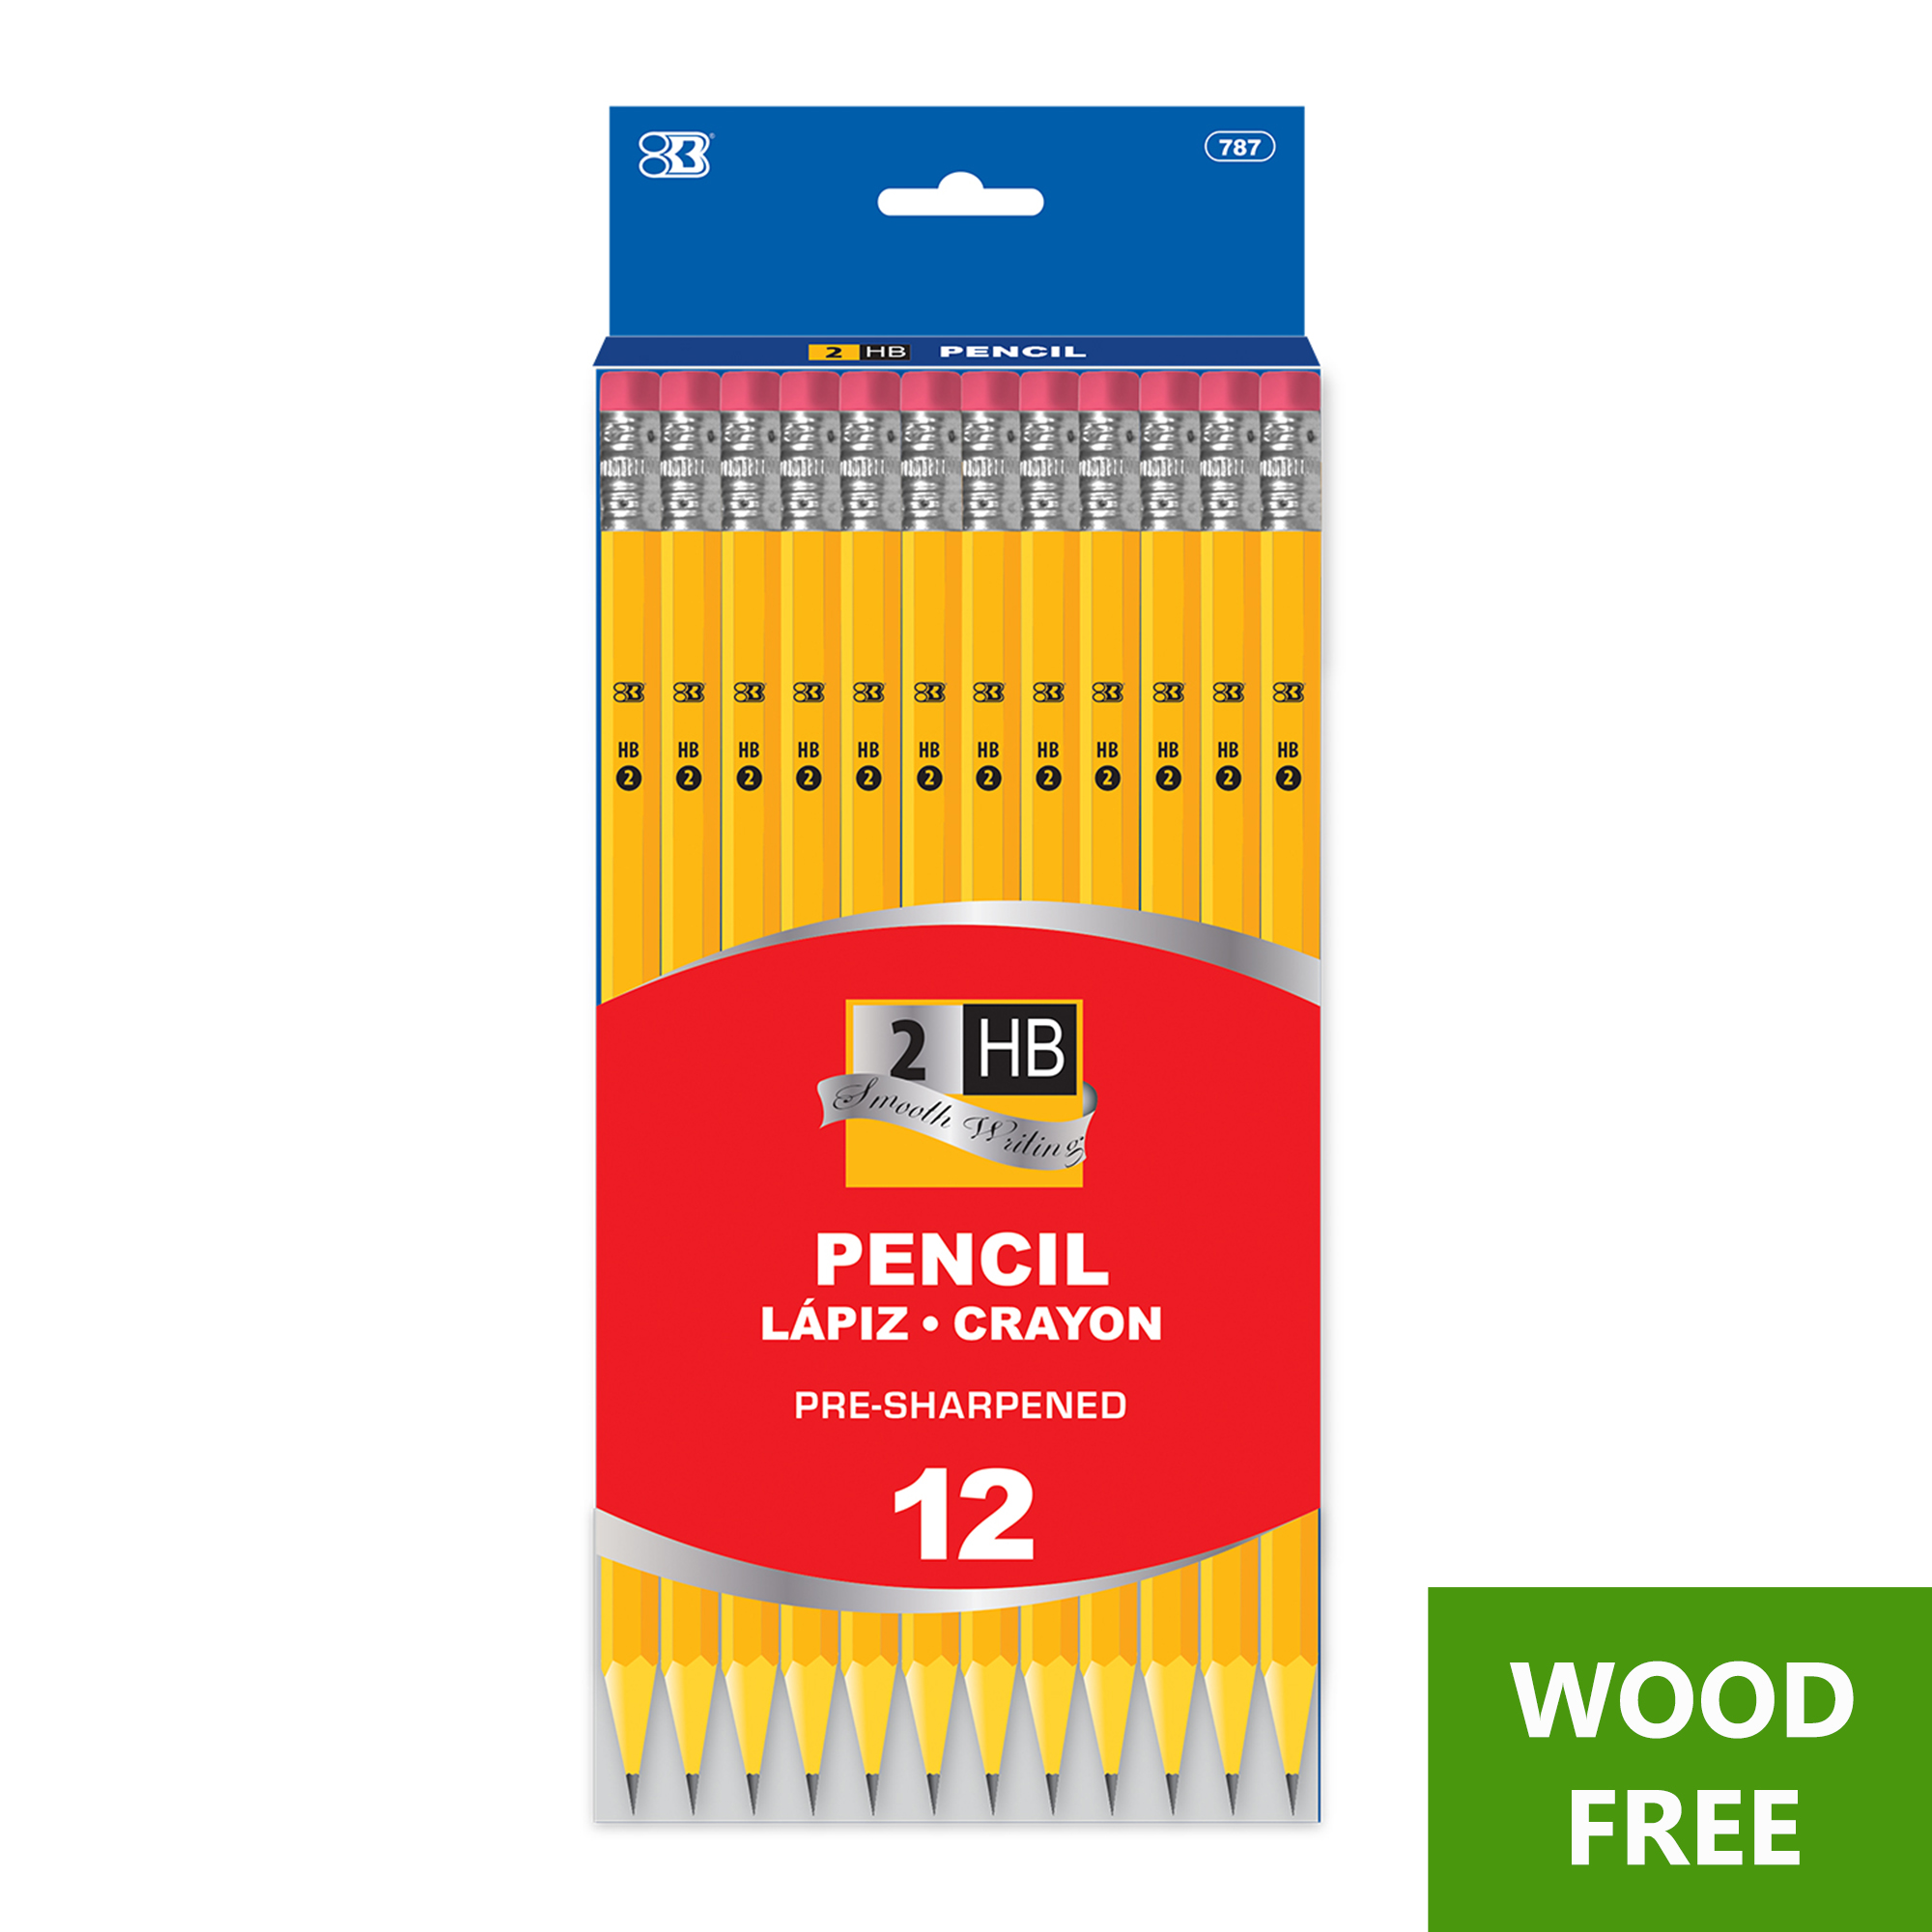 SILVER..SHARPENED PENCILS..WOOD.NO.2..PK OF 12. LOT OF 2 8901324046779 